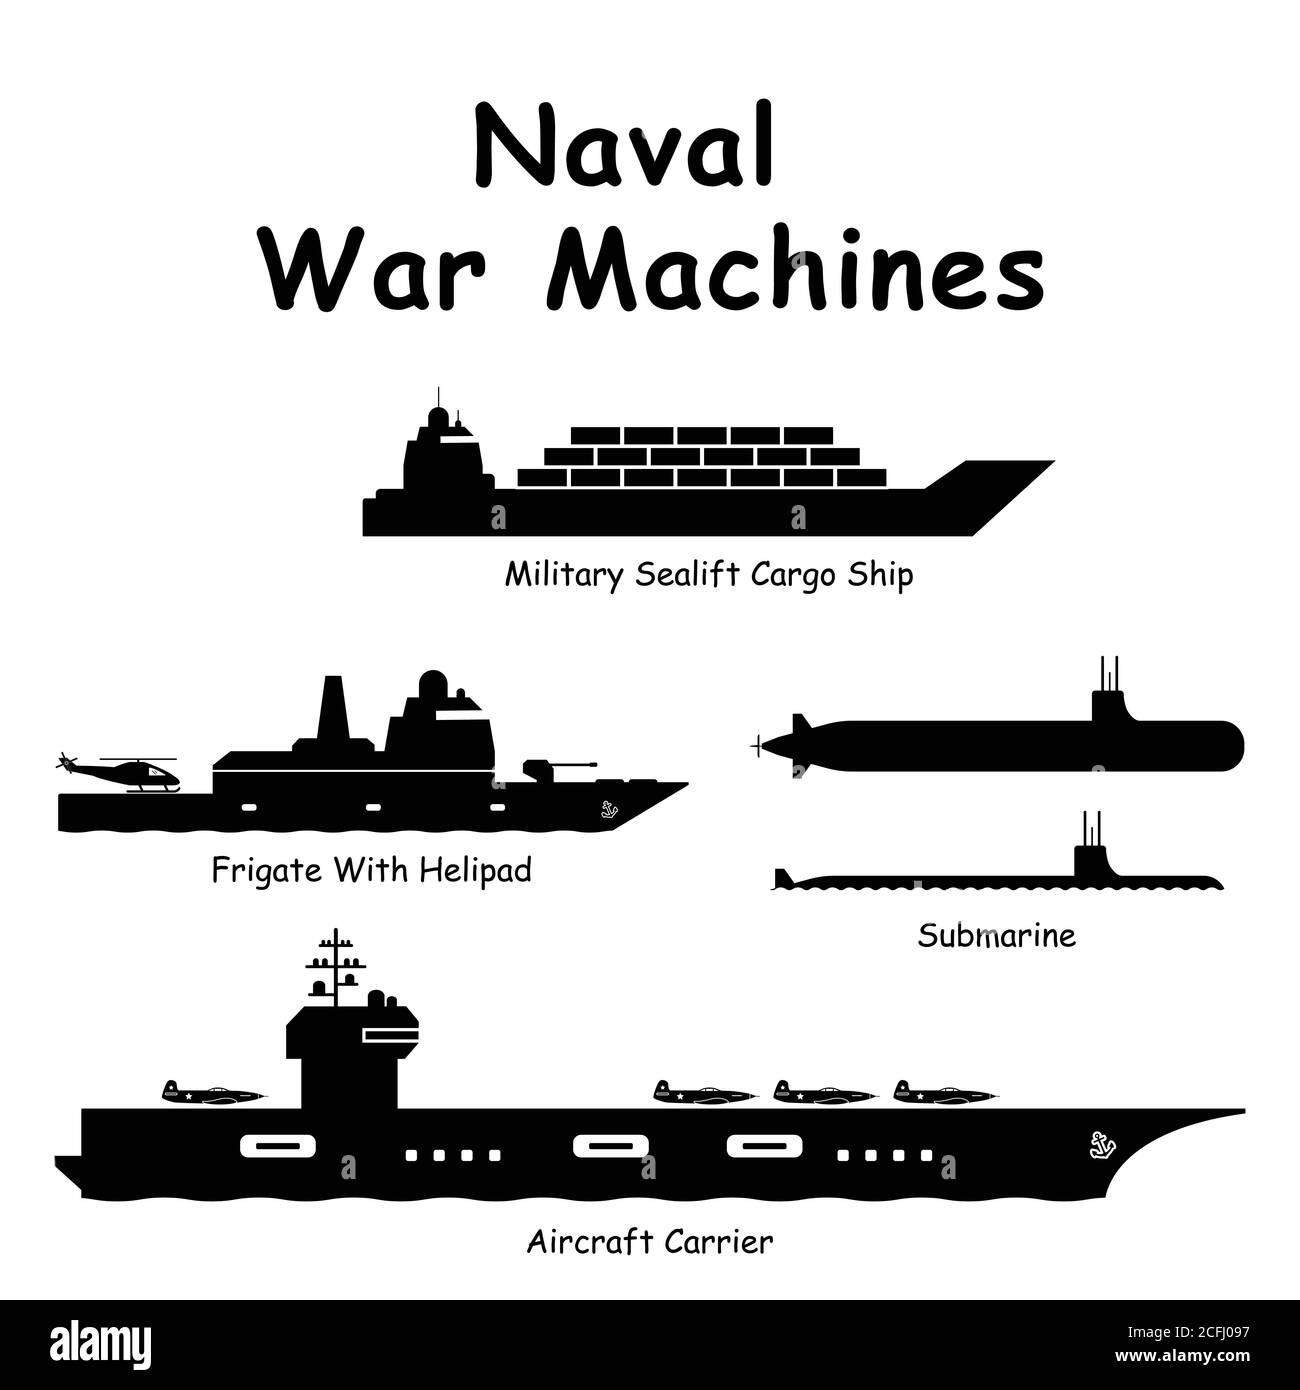 Naval War Machines. Pictogram depicting Navy War Military Vessels such as Aircraft Carrier, Battleship, Destroyer, Attack Ship, Submarine, and Militar Stock Vector